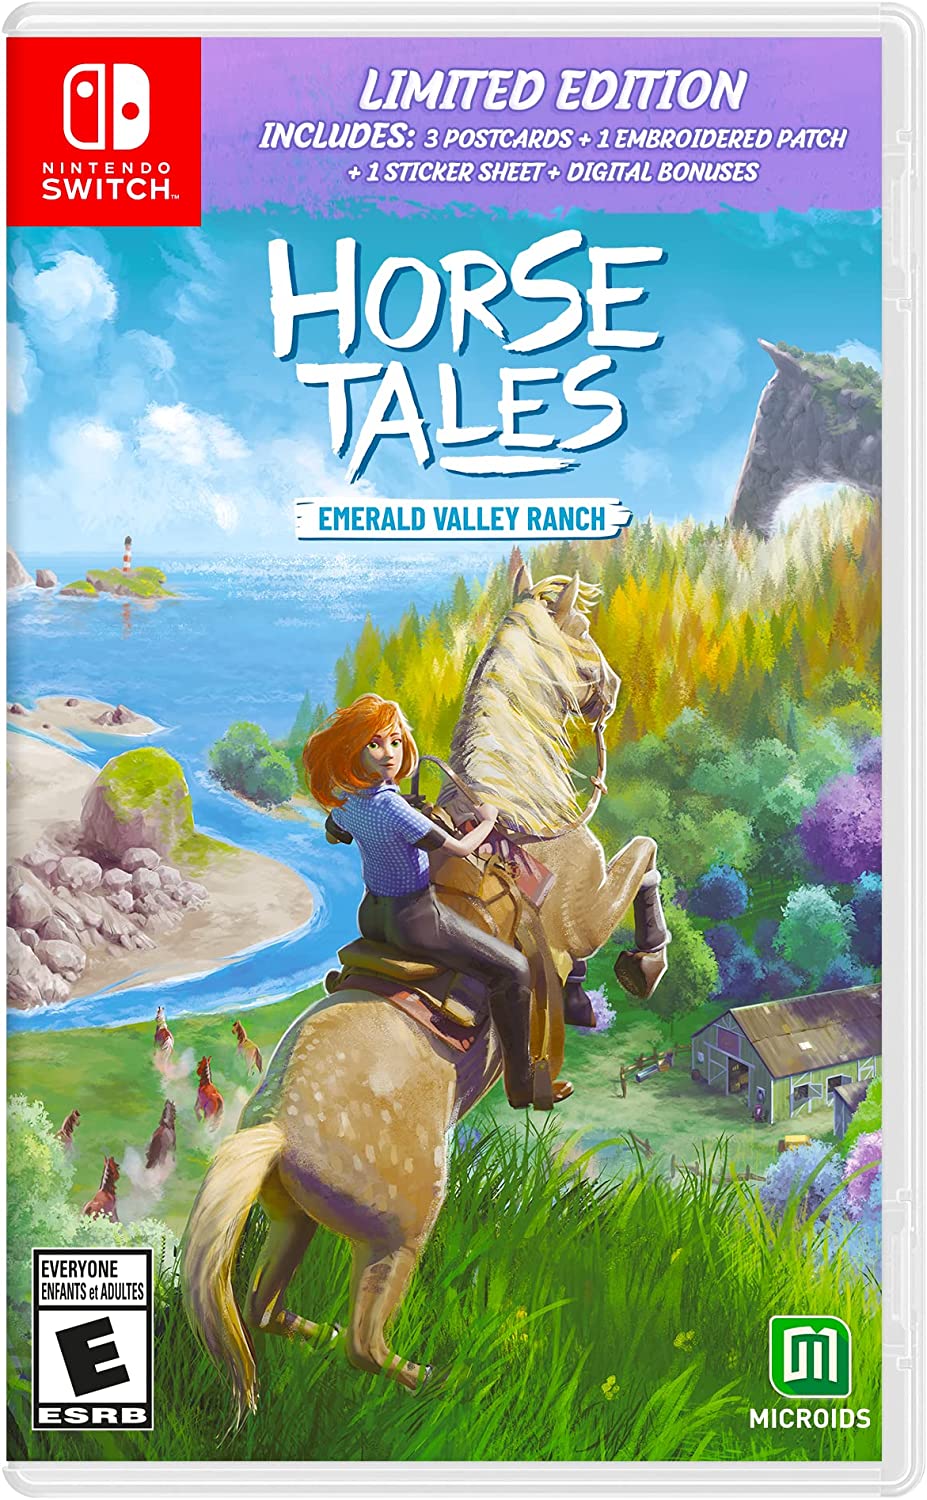 Horse Tales Emerald Valley Ranch - Limited Edition